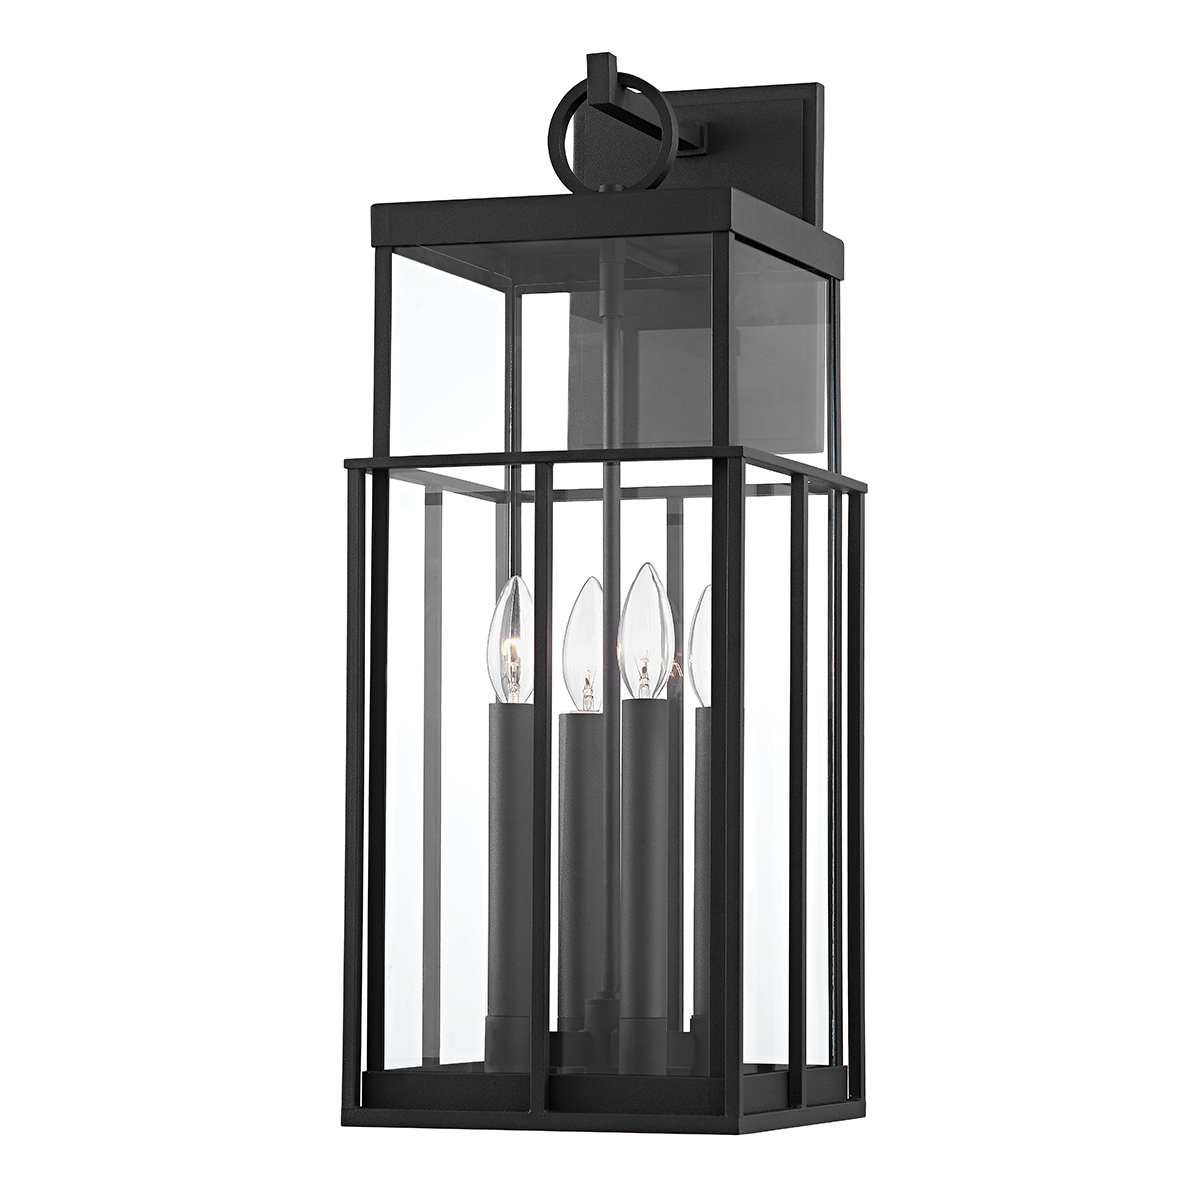 Troy Lighting 4 LIGHT EXTERIOR WALL SCONCE B6483 Outdoor l Wall Troy Lighting TEXTURE BLACK  